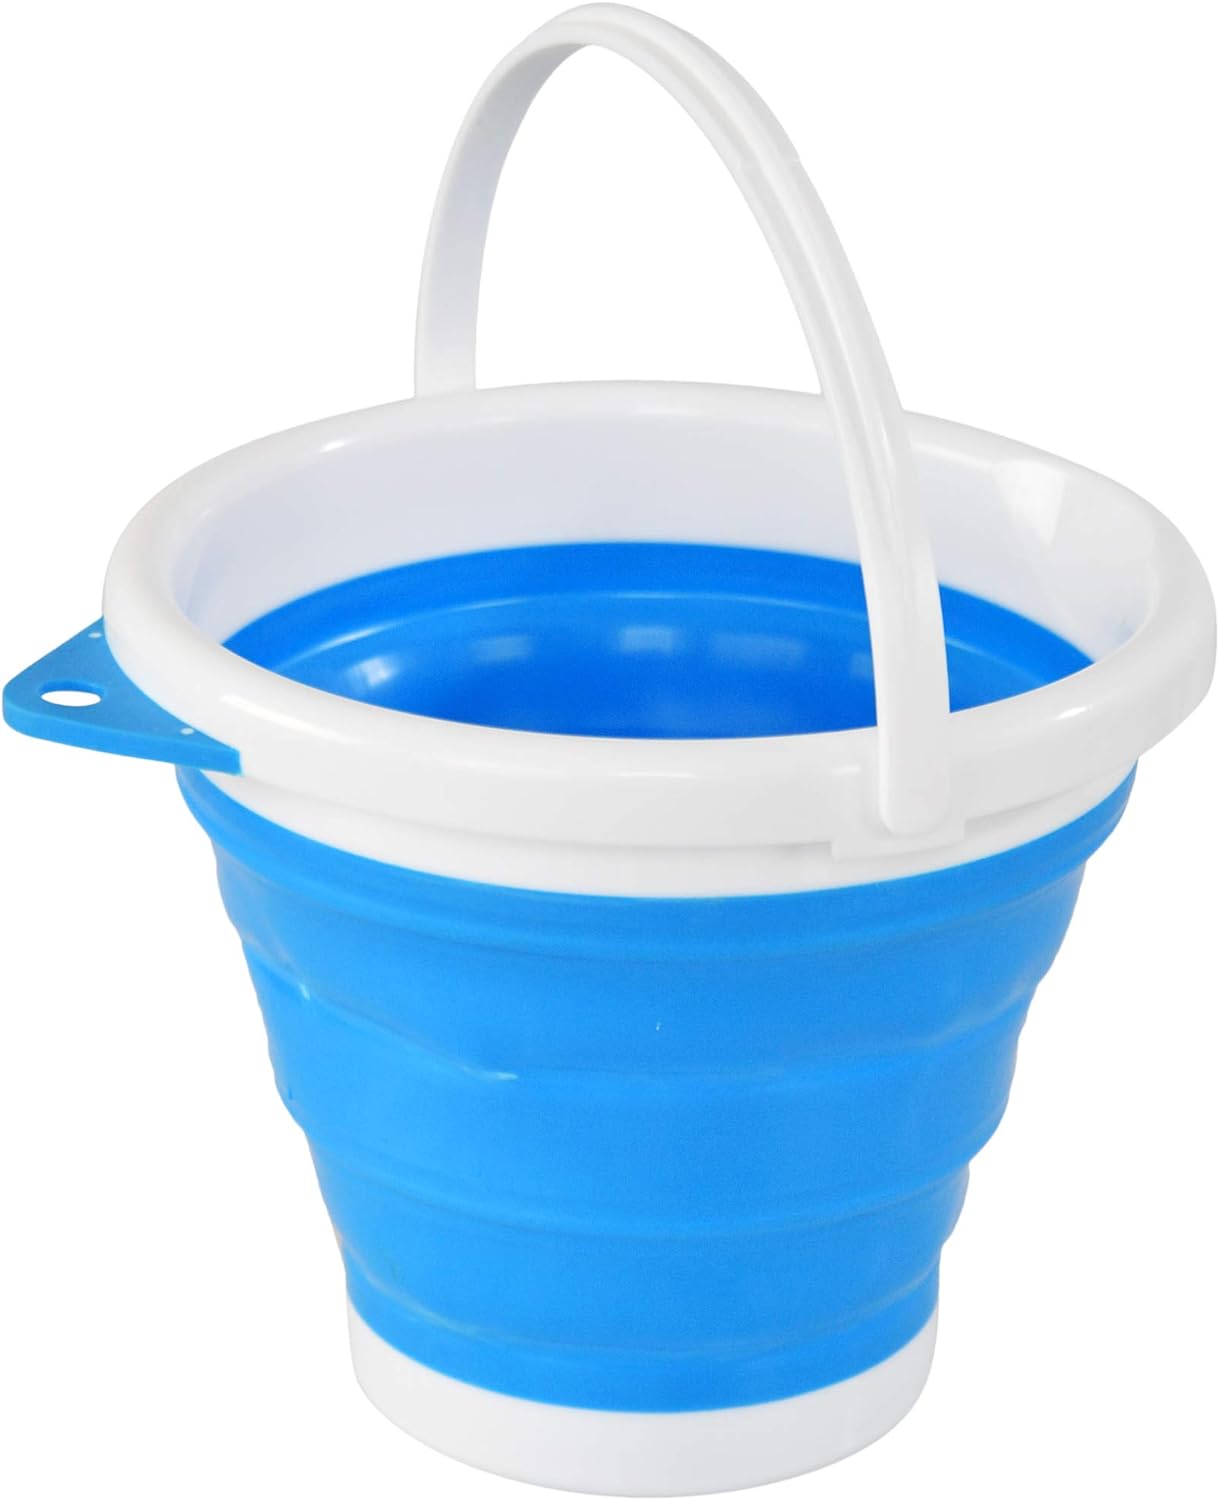 Collapsible Bucket, Portable Bucket for Cleaning, Plastic Bucket for Outdoor or Indoor